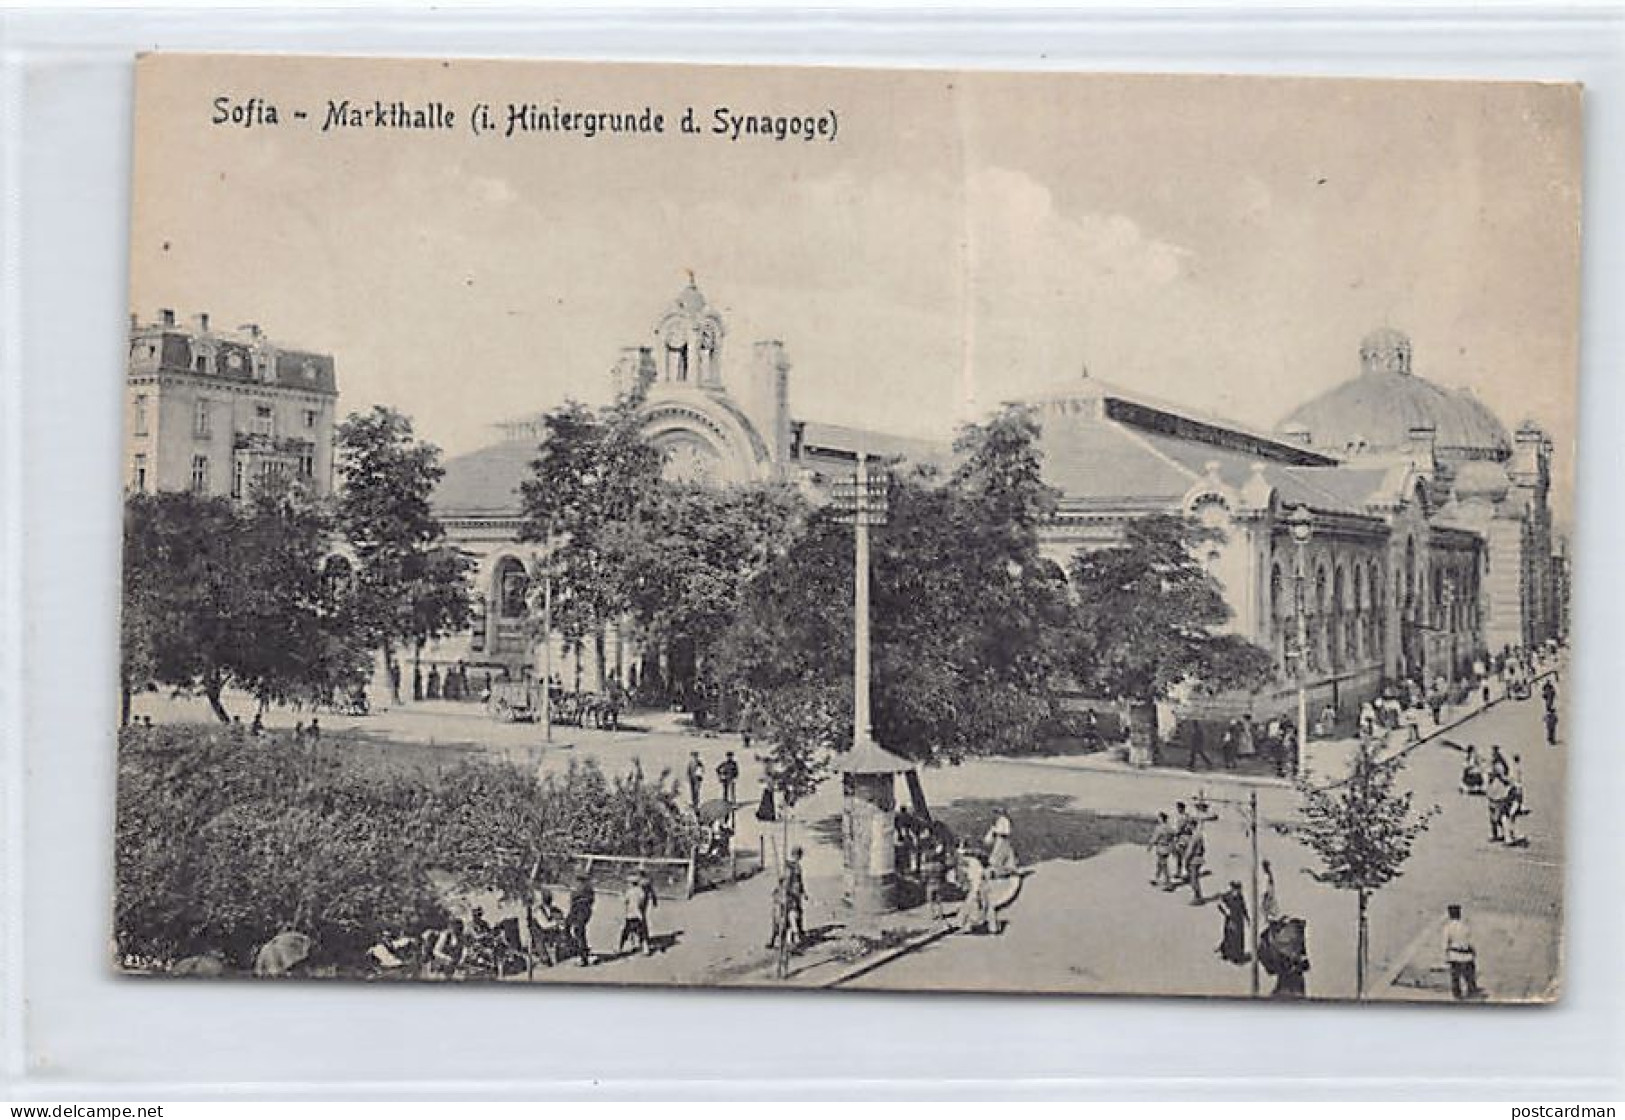 JUDAICA - Bulgaria - SOFIA - The Synagogue, In The Foreground Of The Market Place - Publ. Franz Ziegner  - Jewish